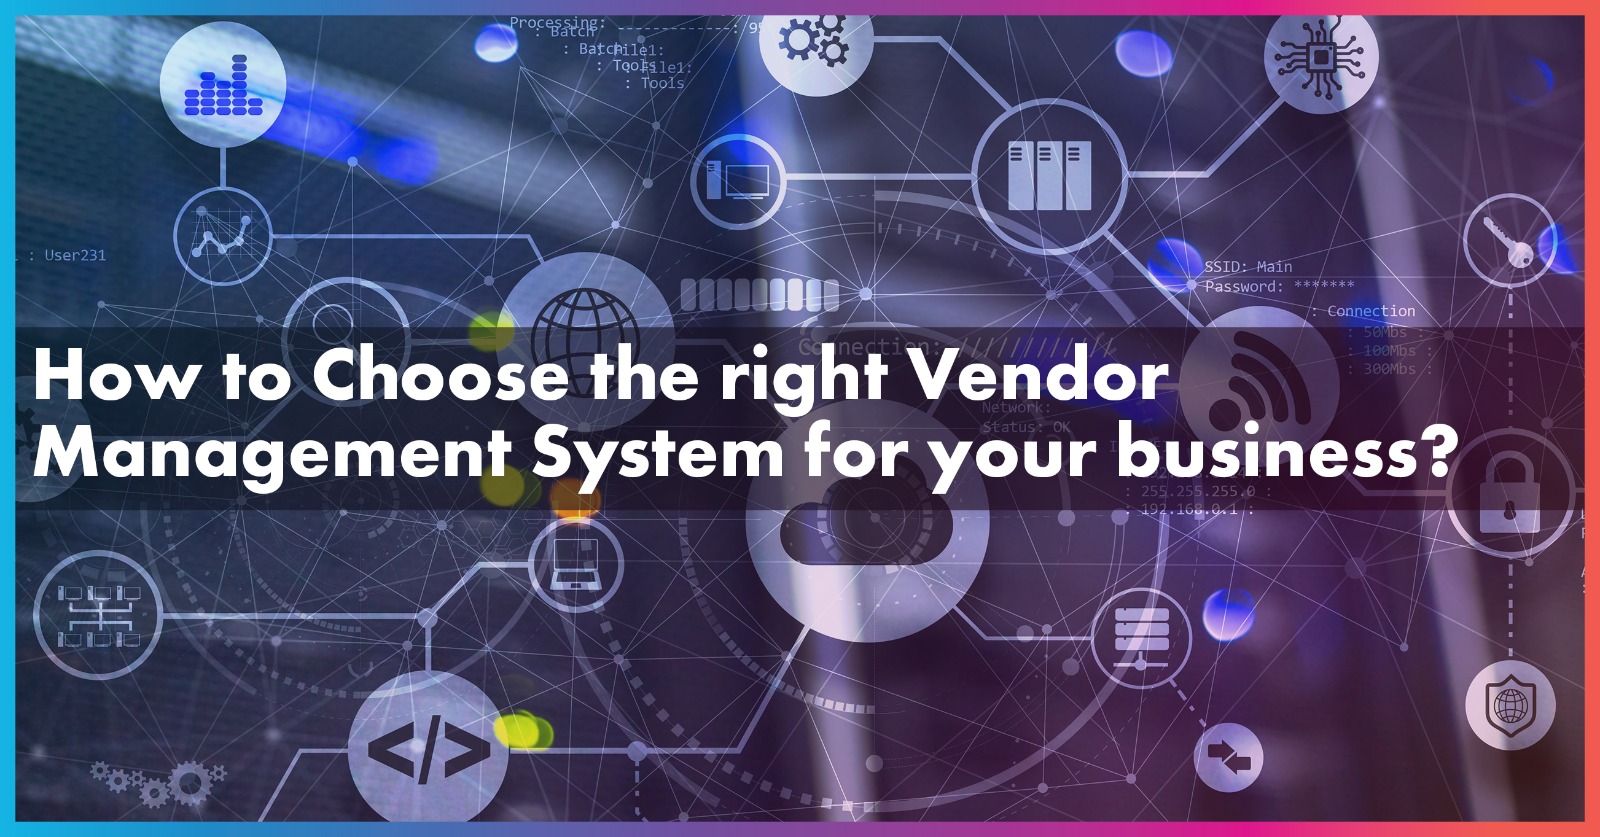 How to Choose the right Vendor Management System for your business?